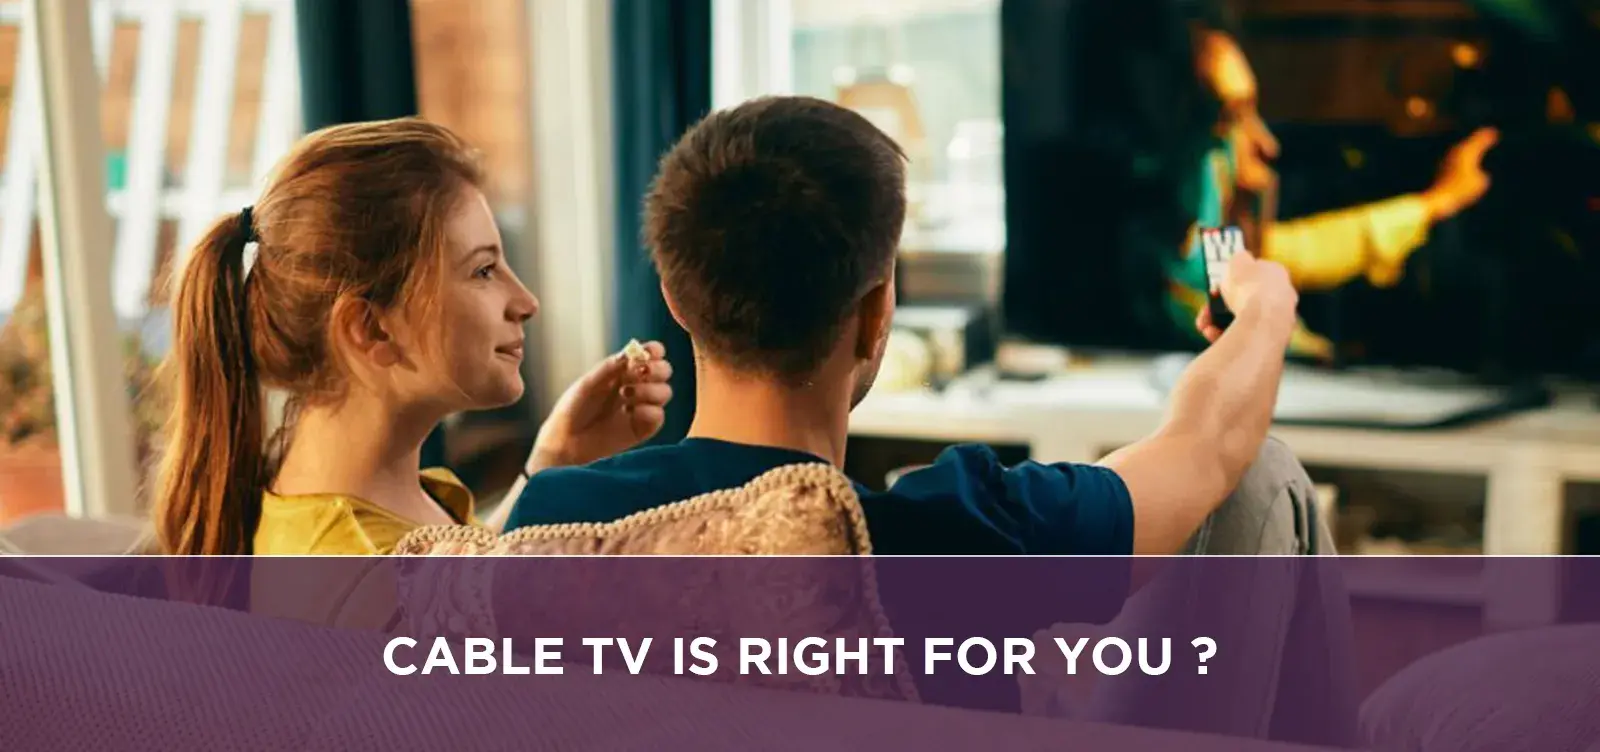 Cable TV: is Right for You?